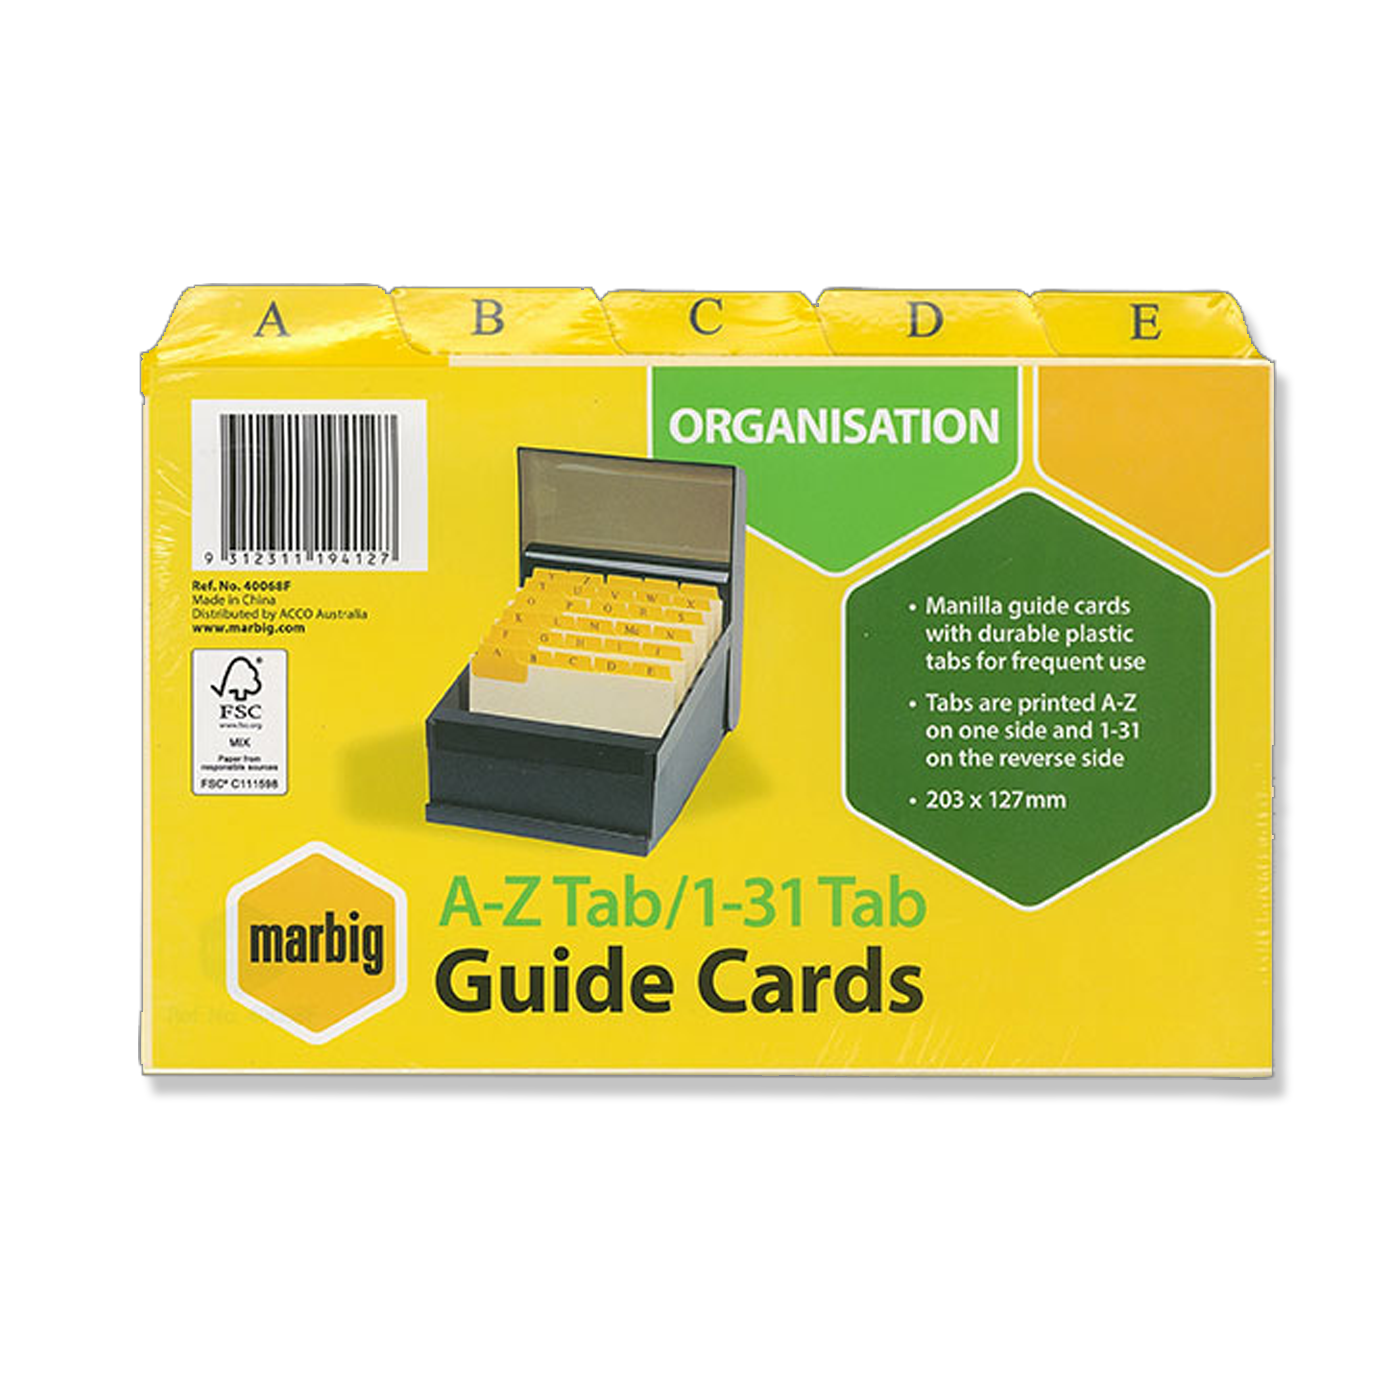 Marbig Guide Card Indices for System Cards A-Z / 1-31 Tab Manilla 203 x 127mm or 8"x5" Media 1 of 1